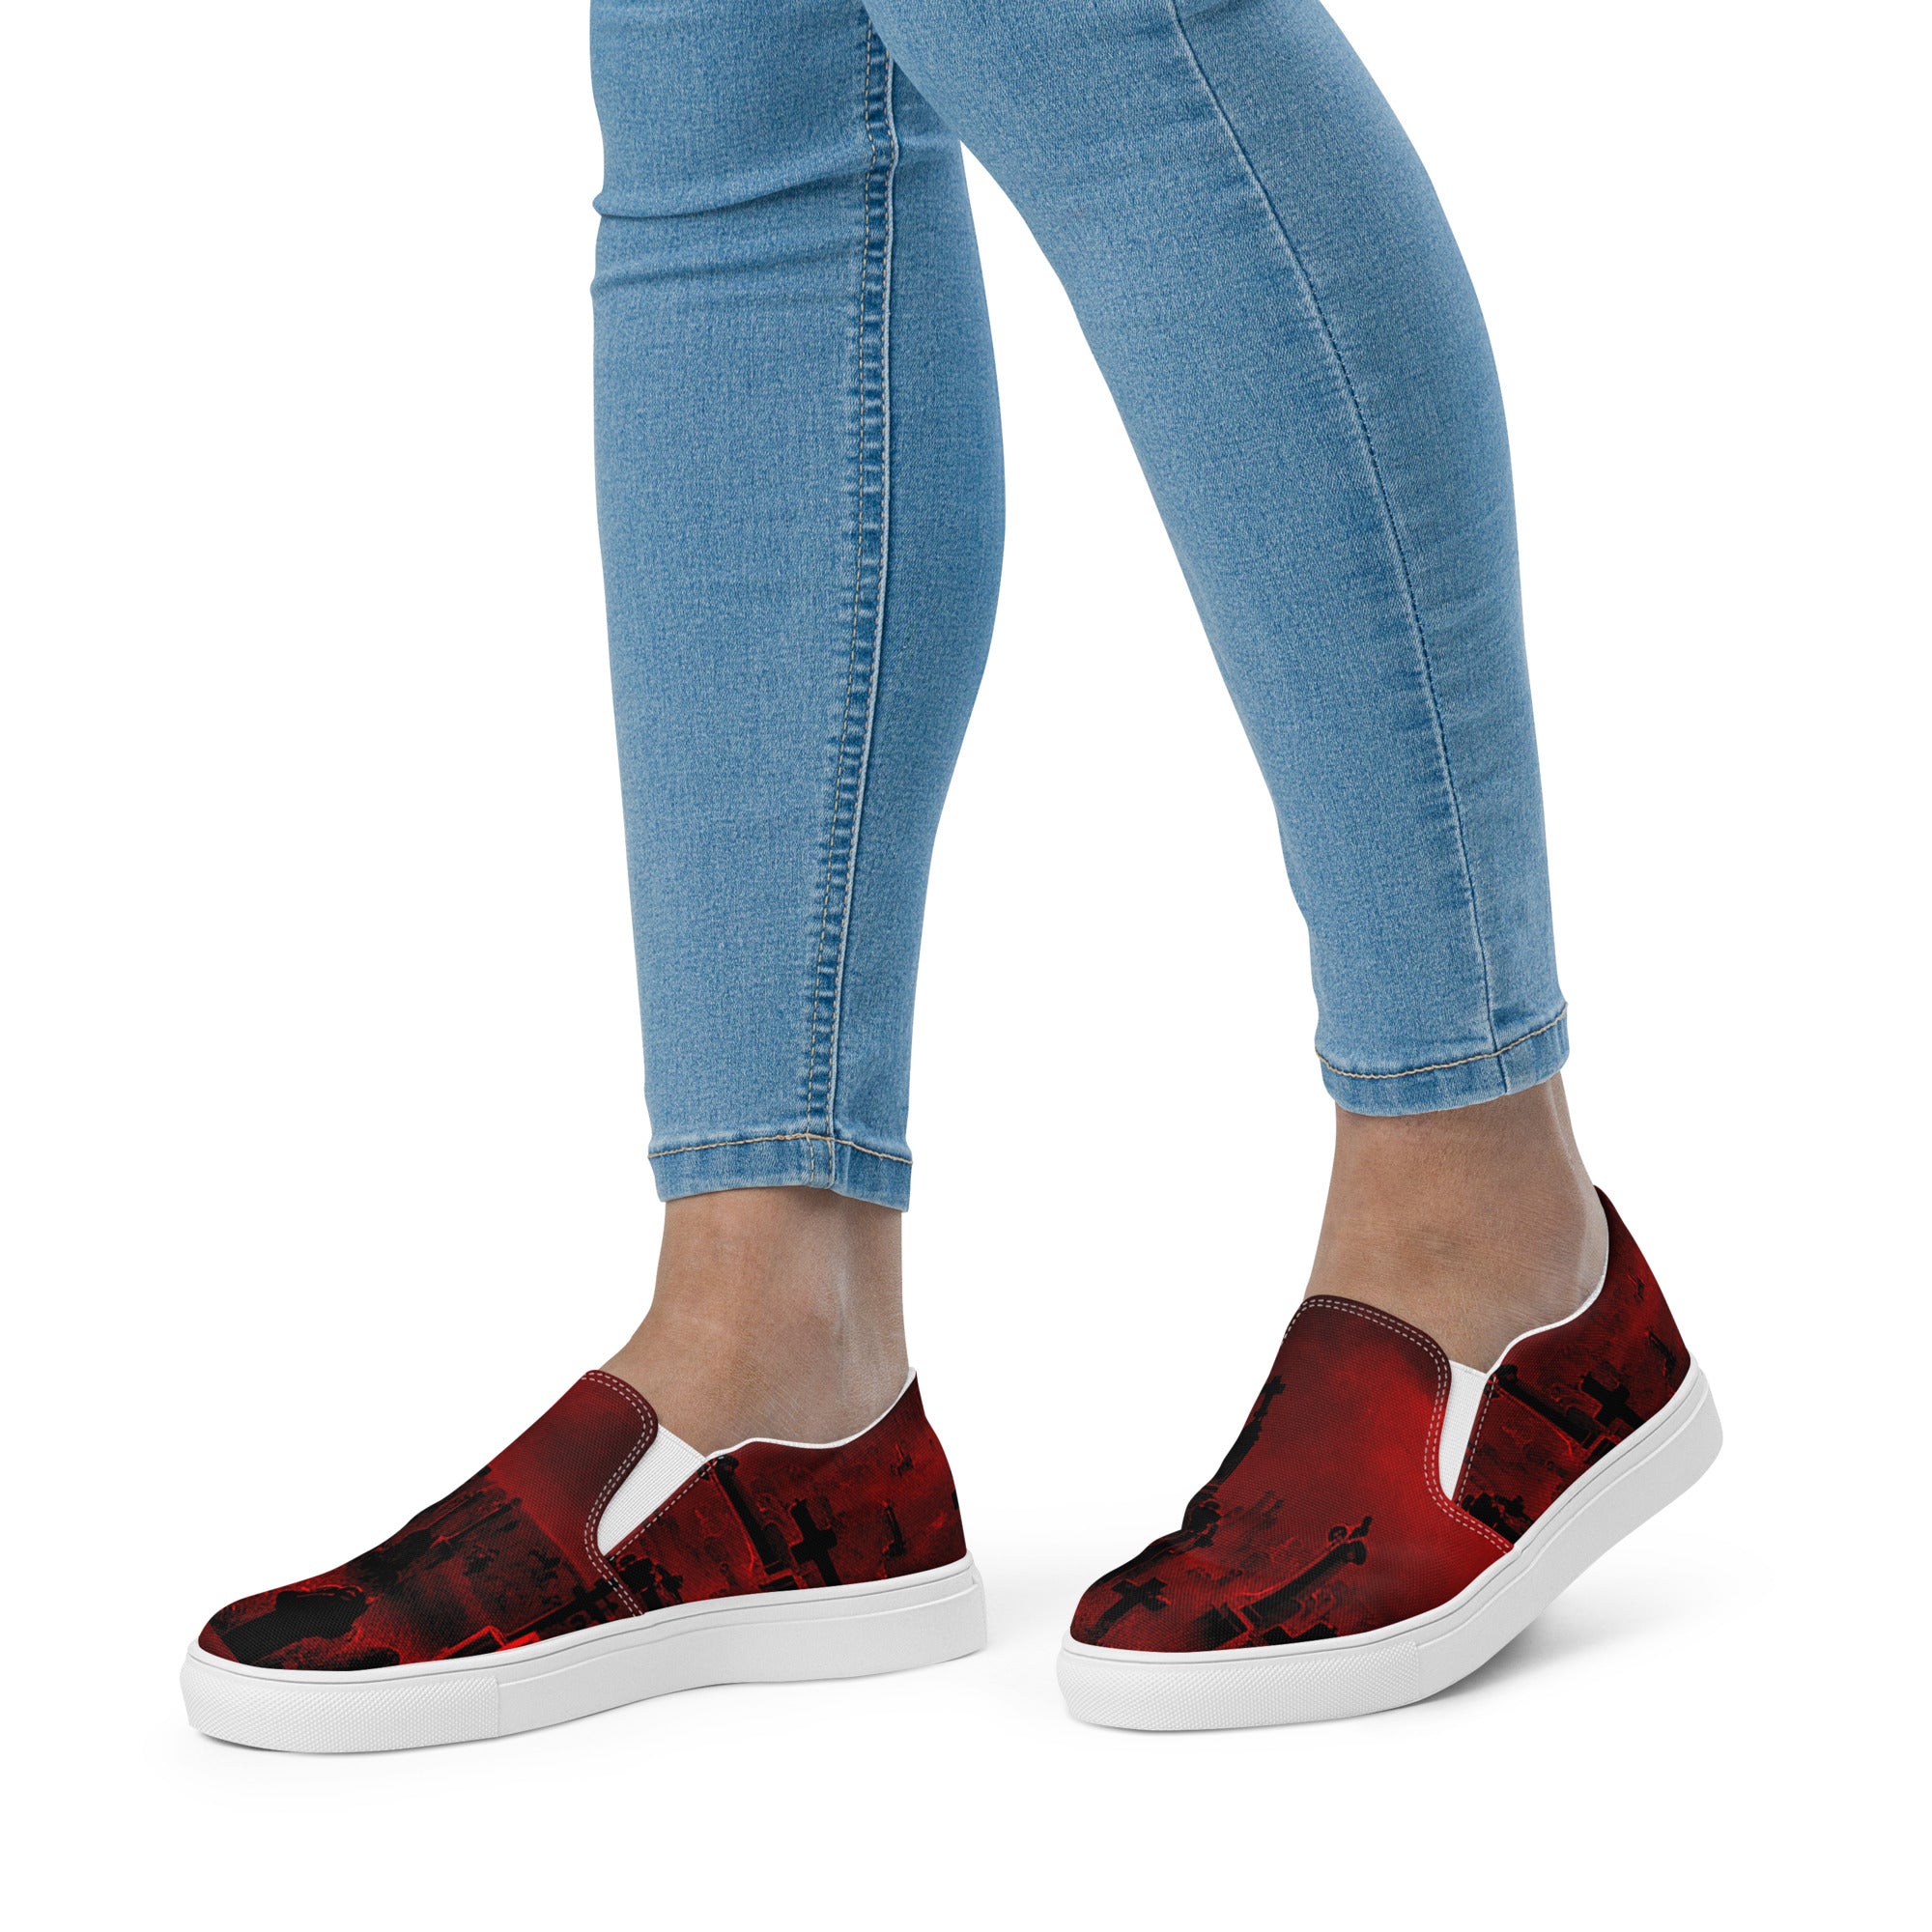 Blood Red Cemetery Tombstone Graveyard Scene Women’s slip-on canvas shoes